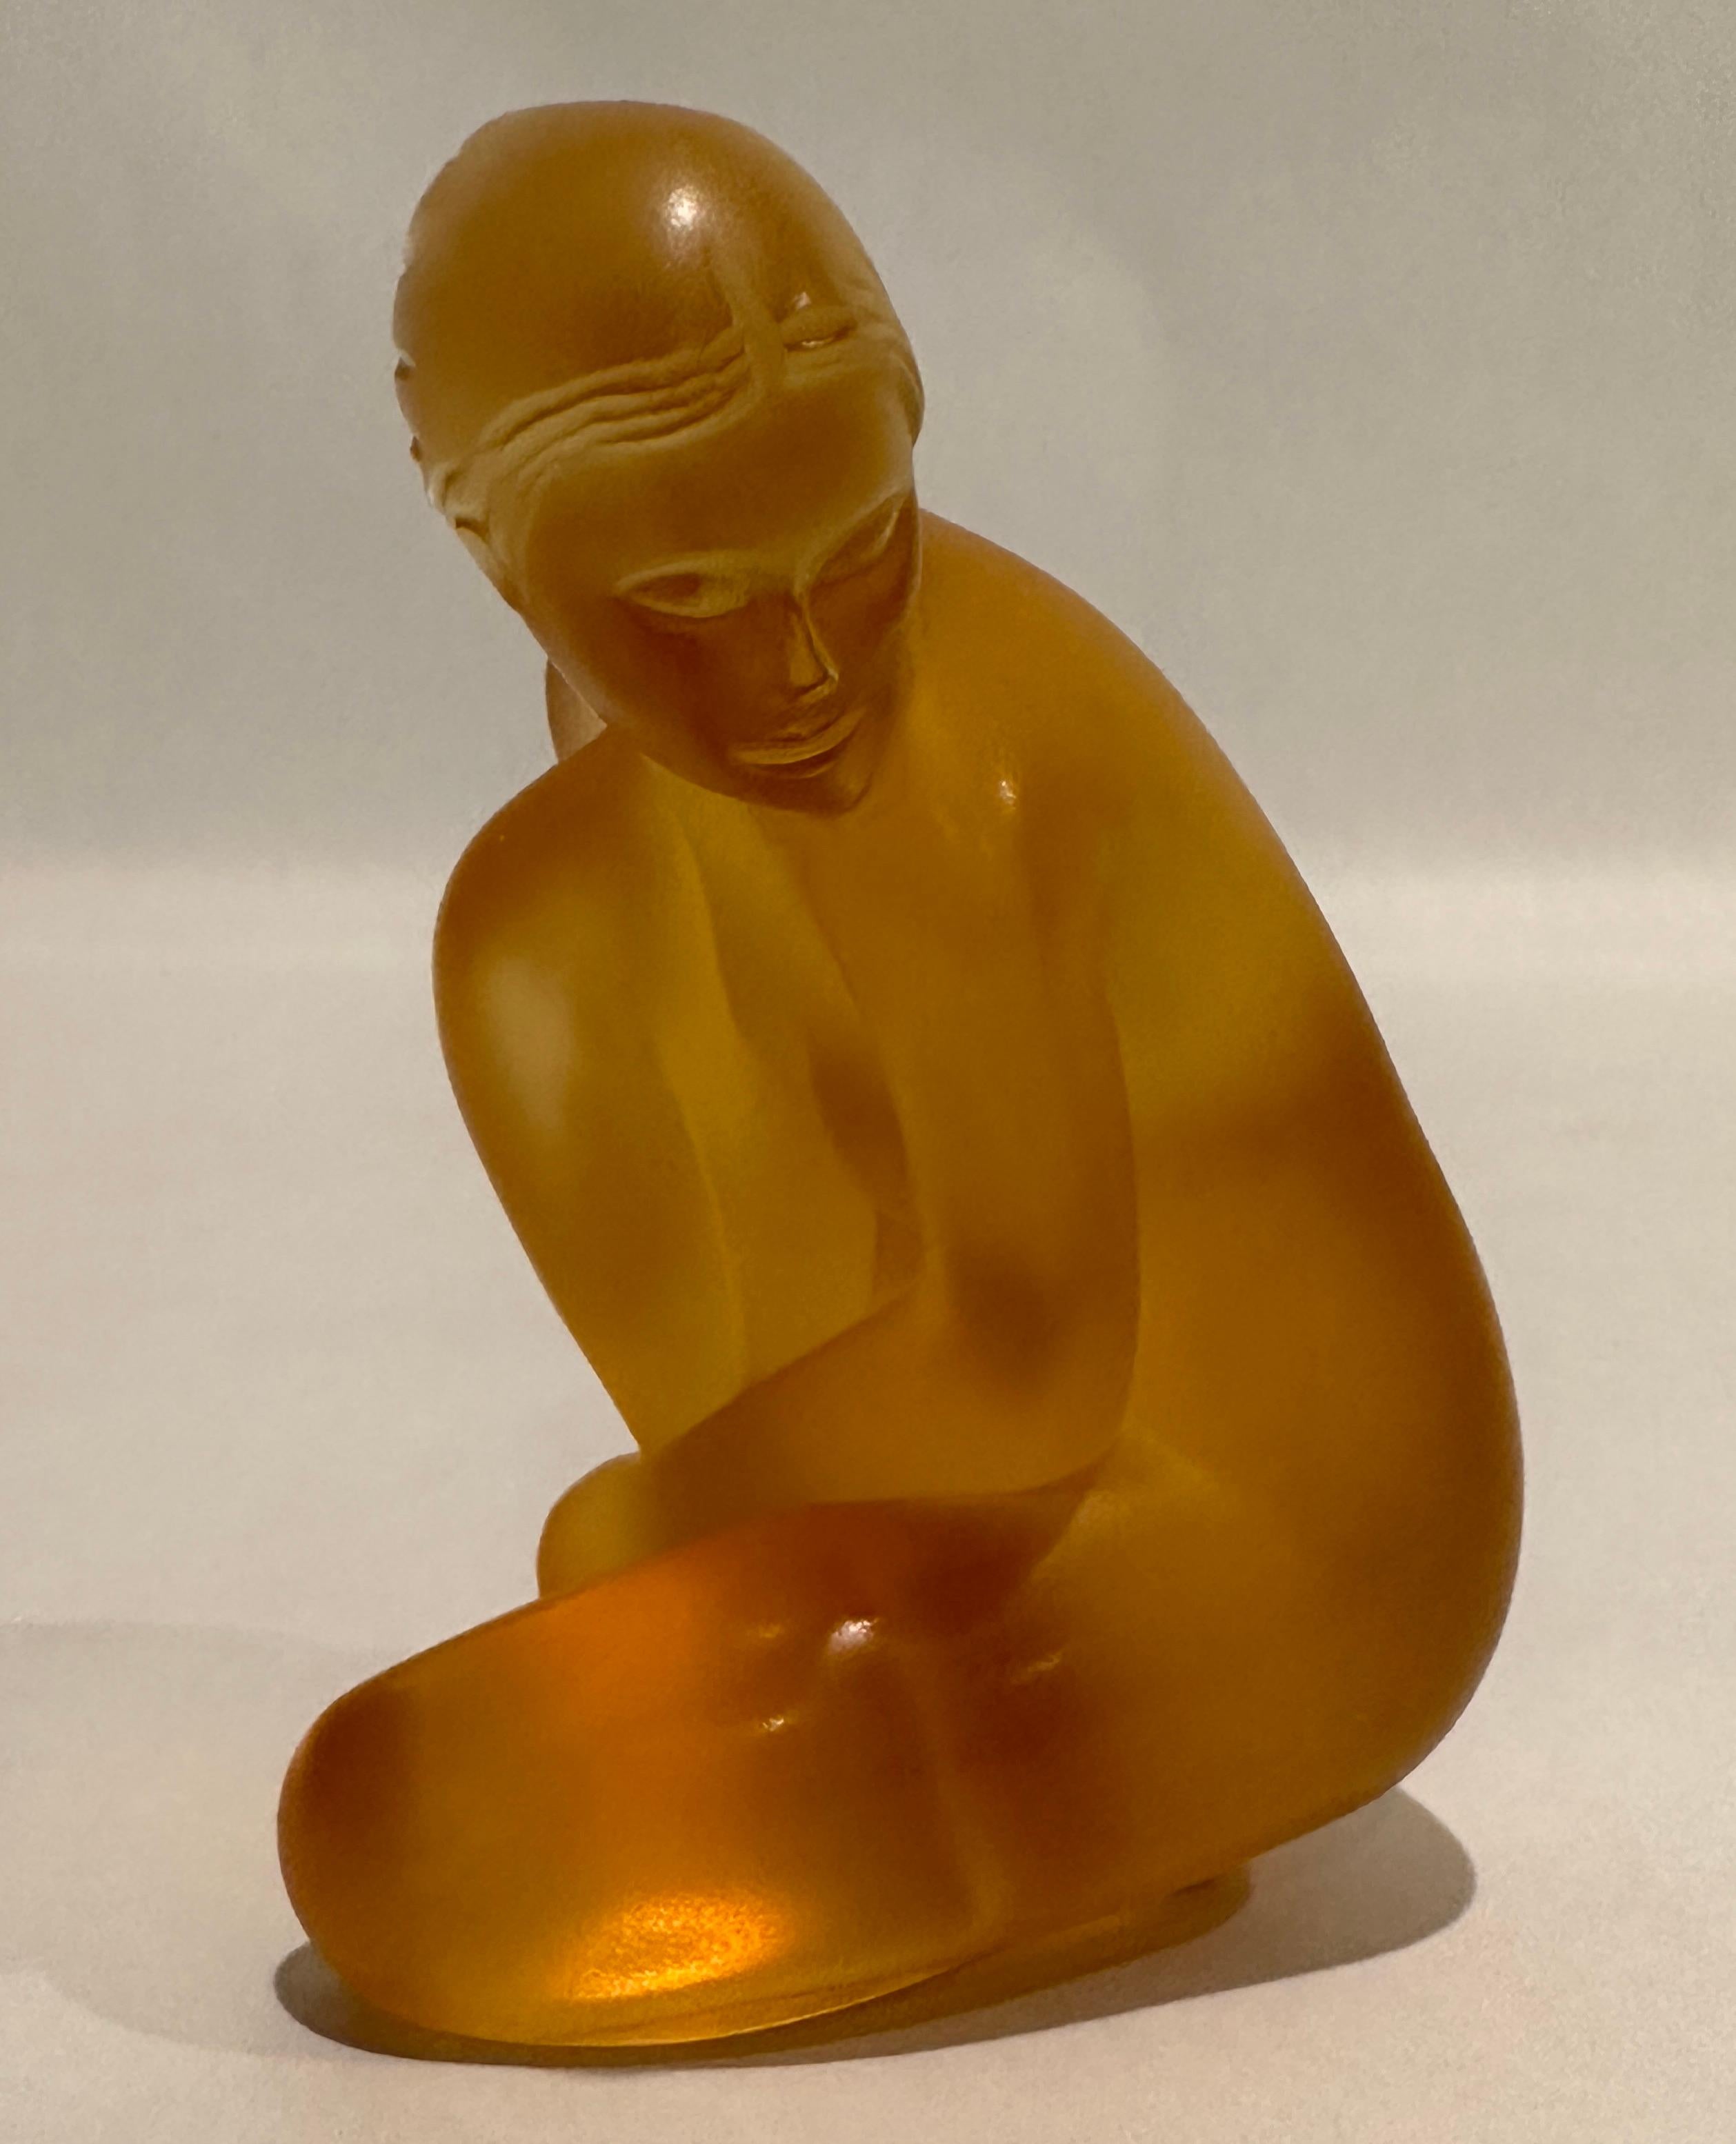 Beautiful Lalique limited edition nude amber glass Venus figurine. SignedLalique France and dated 2006 Limited edition 584/999.